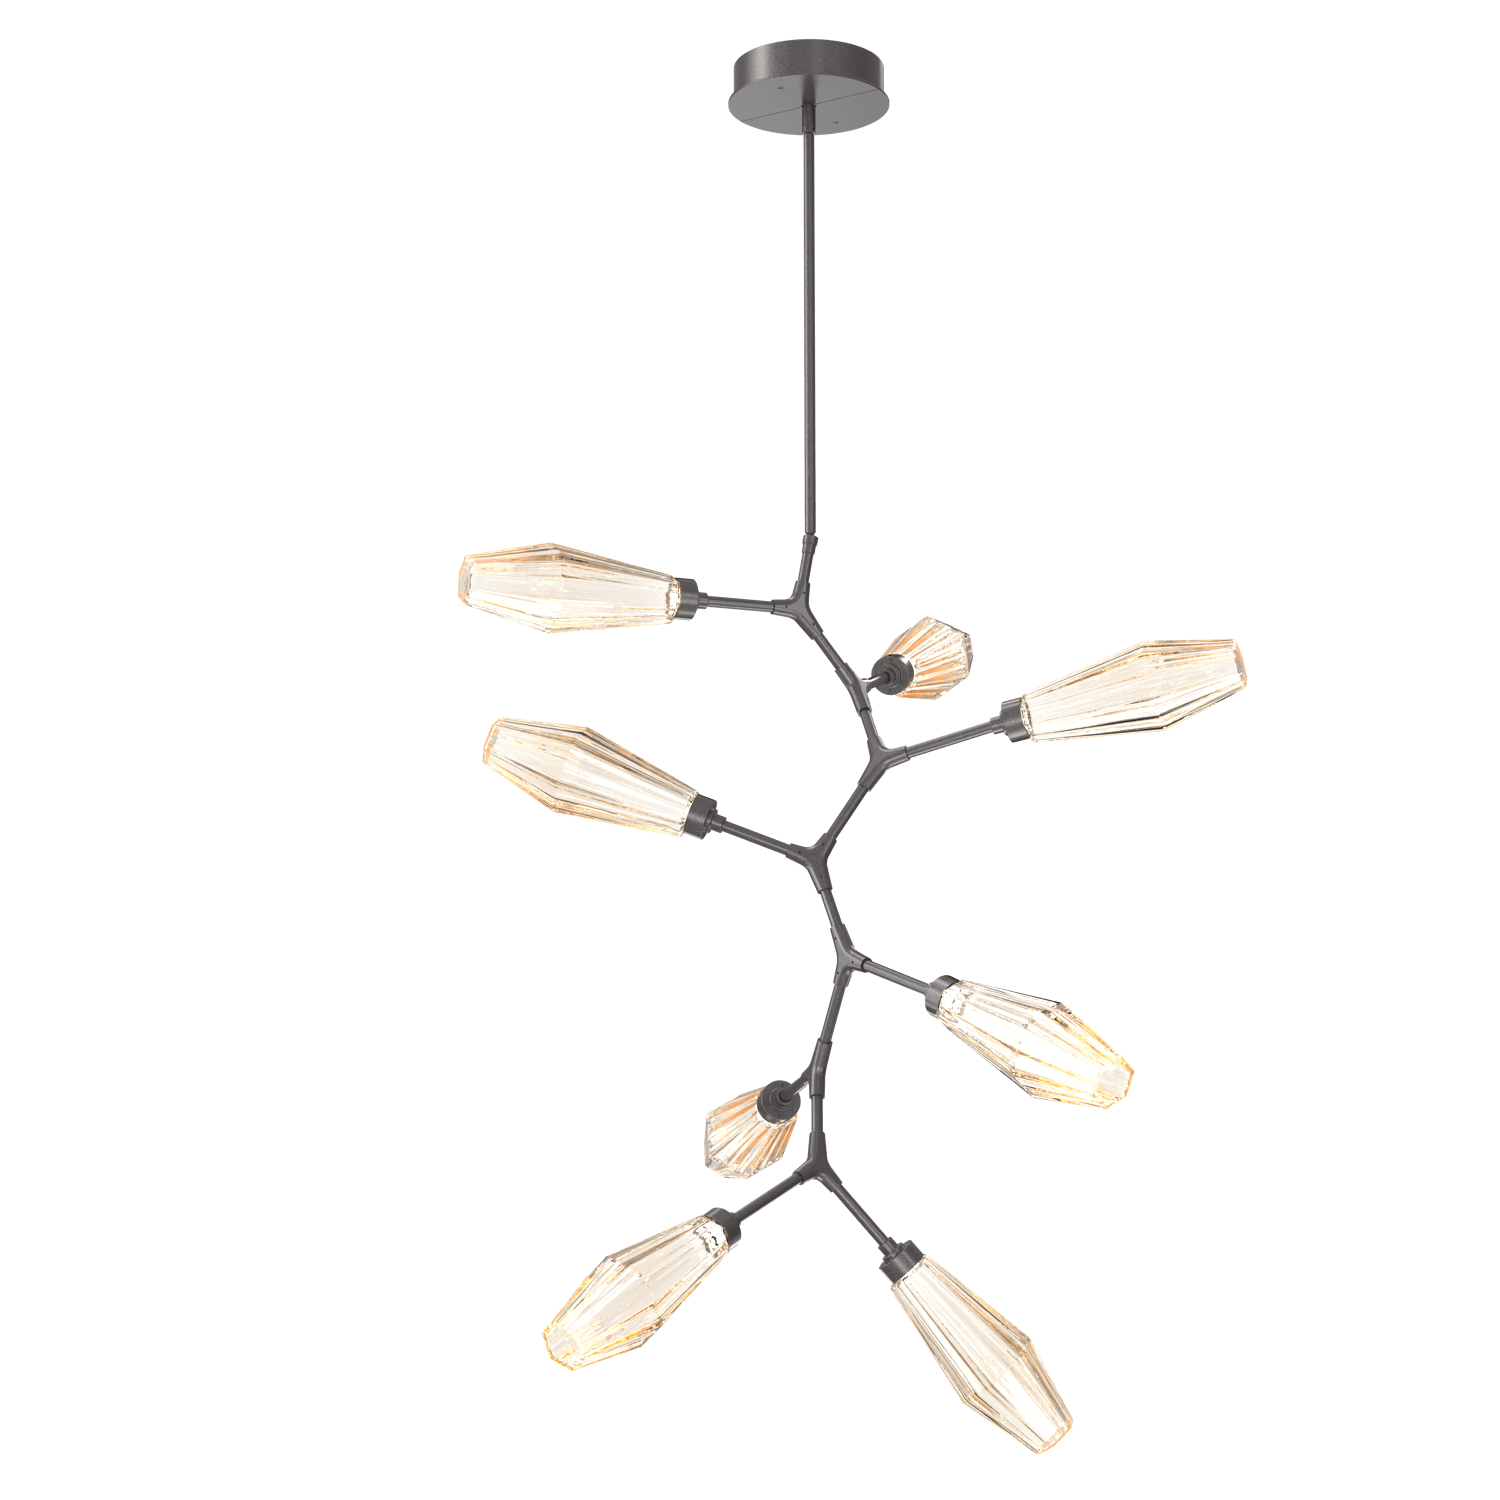 CHB0049-VB-GP-RA-Hammerton-Studio-Aalto-8-light-modern-vine-chandelier-with-graphite-finish-and-optic-ribbed-amber-glass-shades-and-LED-lamping